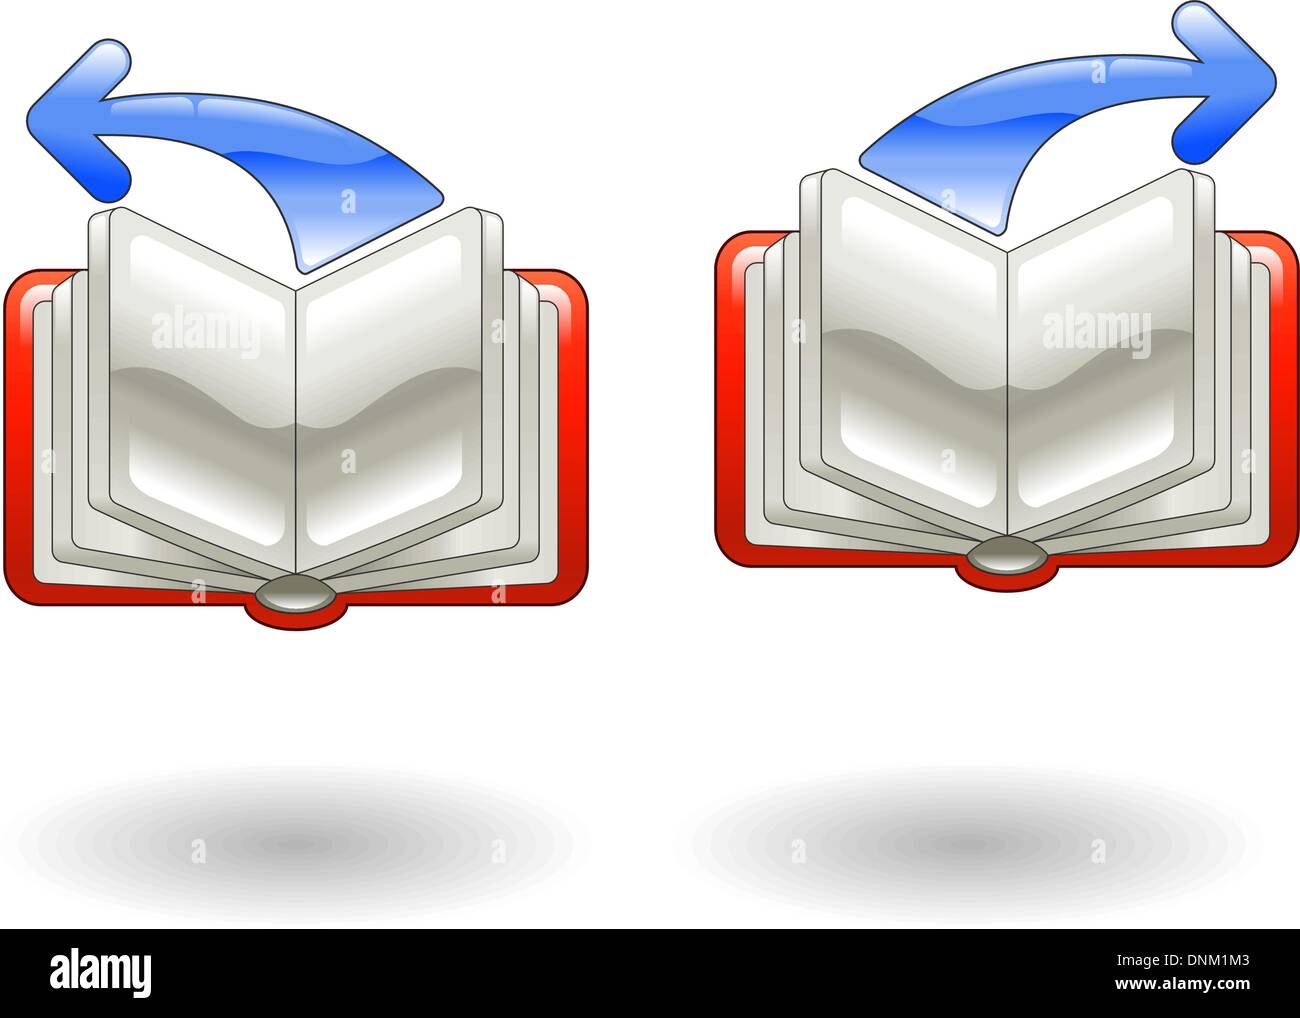 Illustration of books open with back and forward arrows Stock Vector